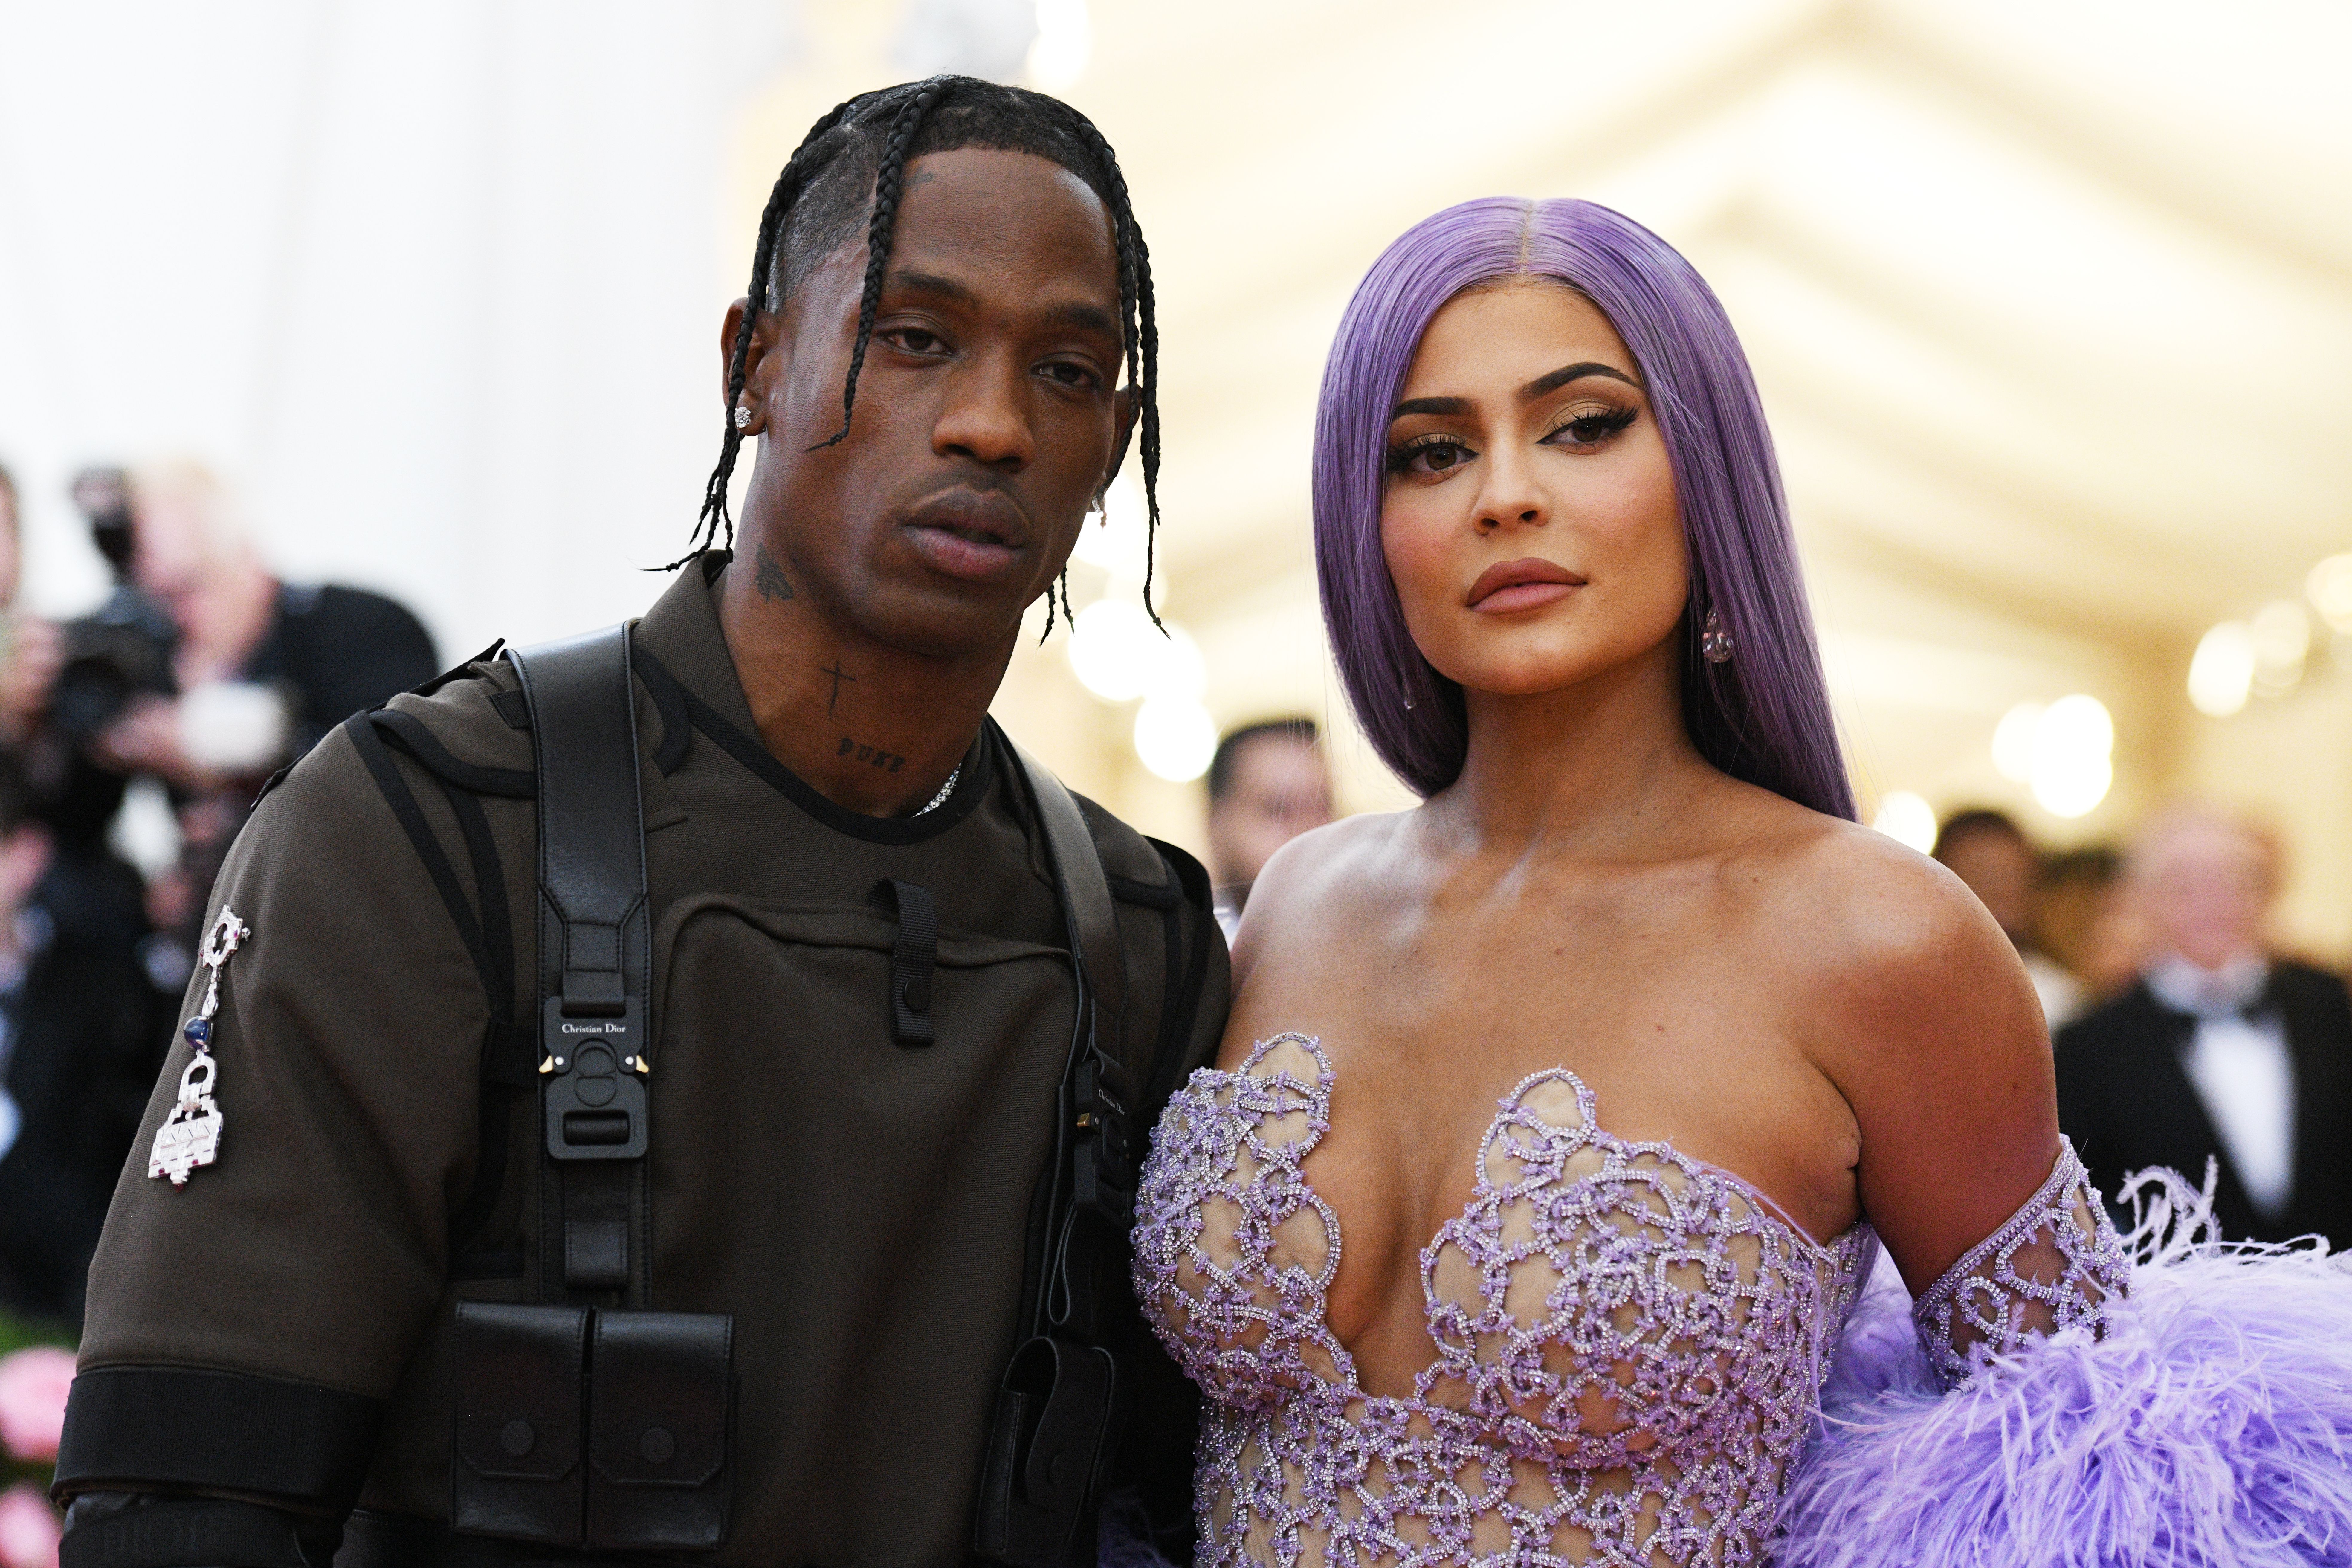 Met Gala 2021: Why Pregnant Kylie Jenner 'Backed Out